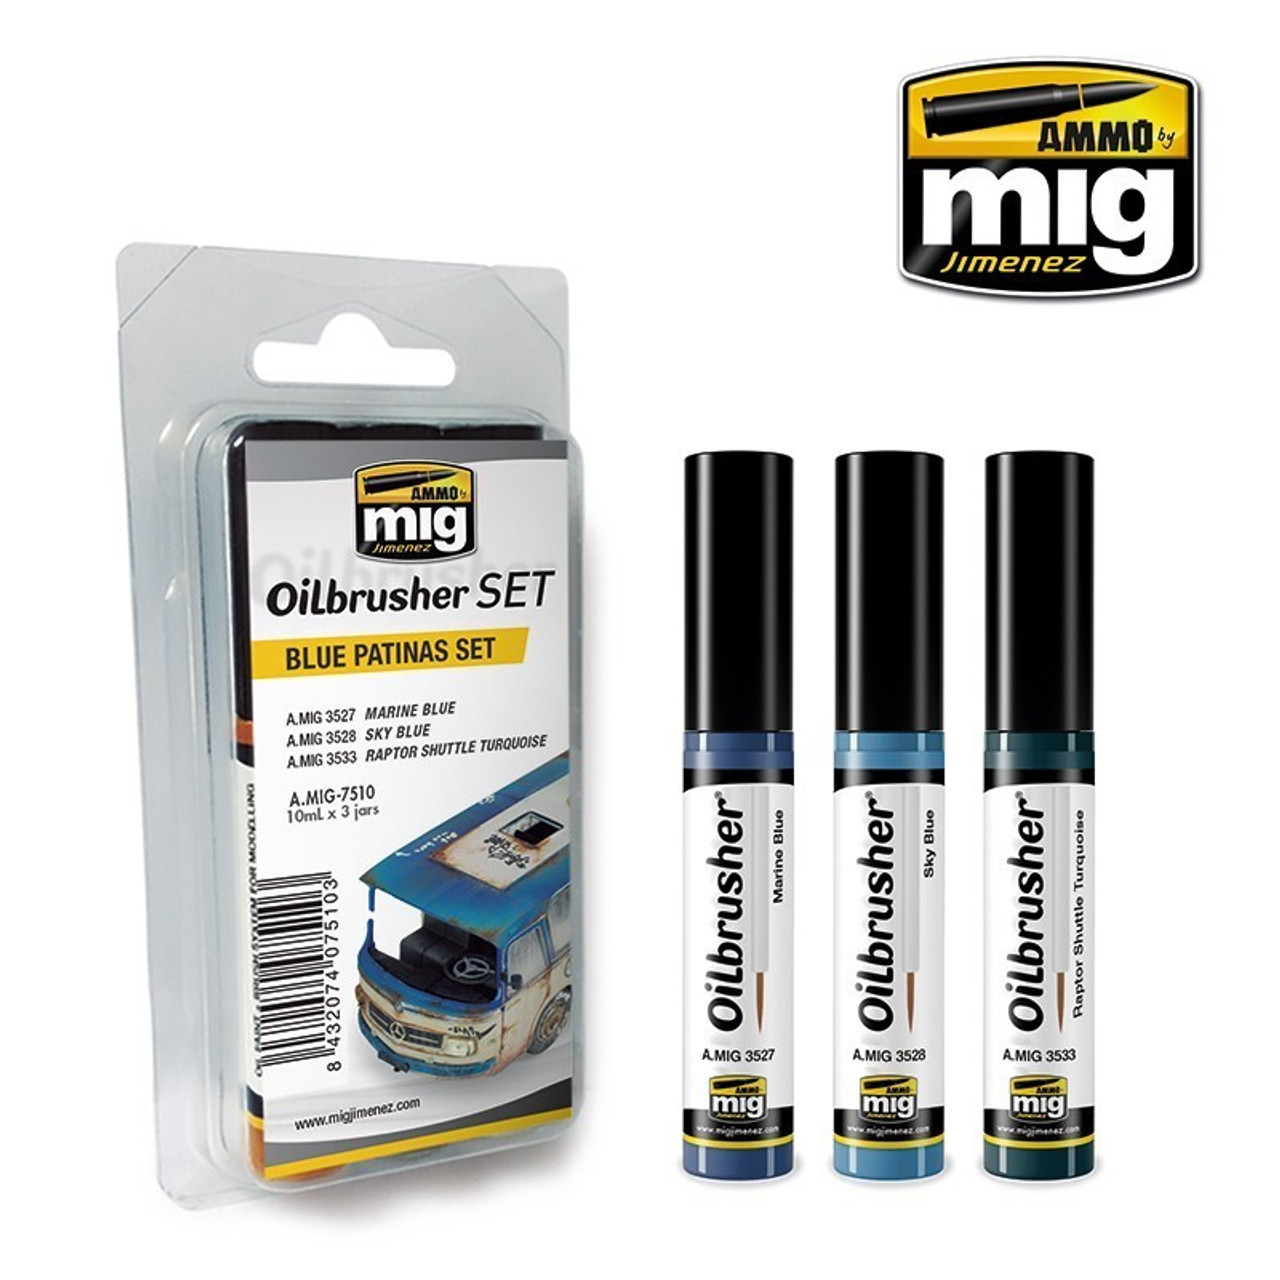 AMM7510 AMMO by Mig Oilbrusher Set - Blue Patinas